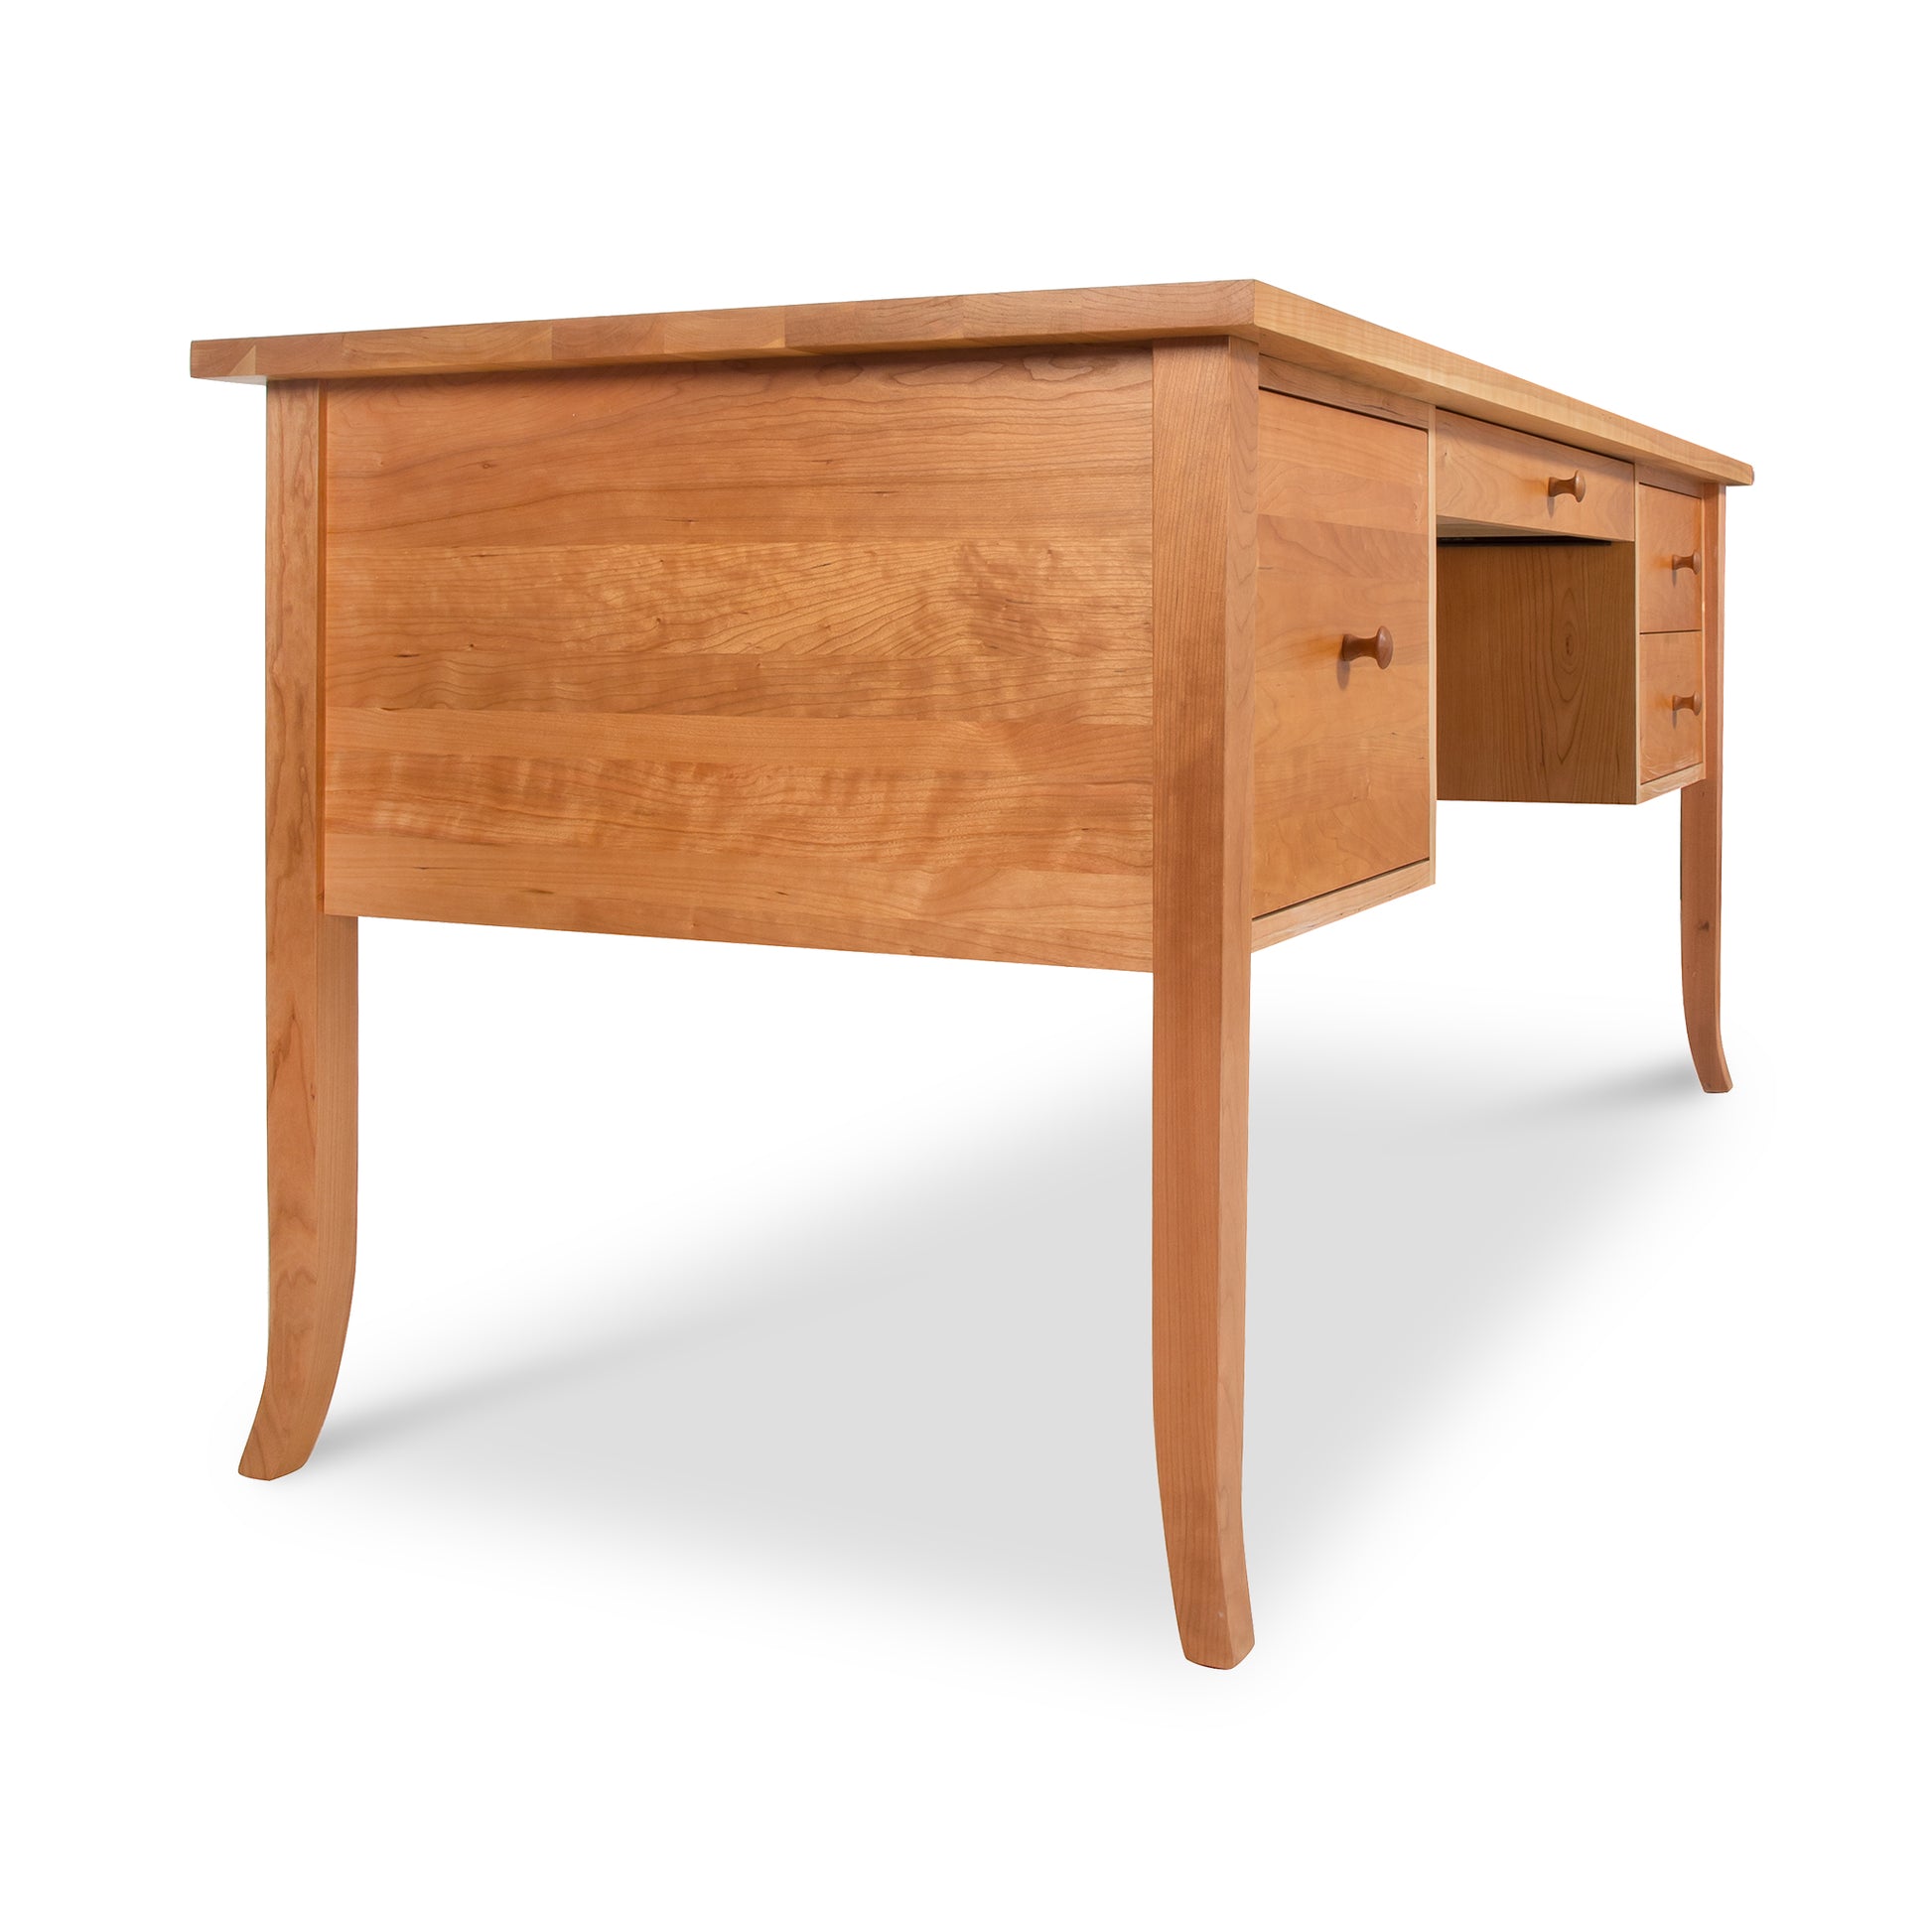 A classic Lyndon Furniture Large Wood Flare Leg Executive Desk made from sustainable harvested woods.